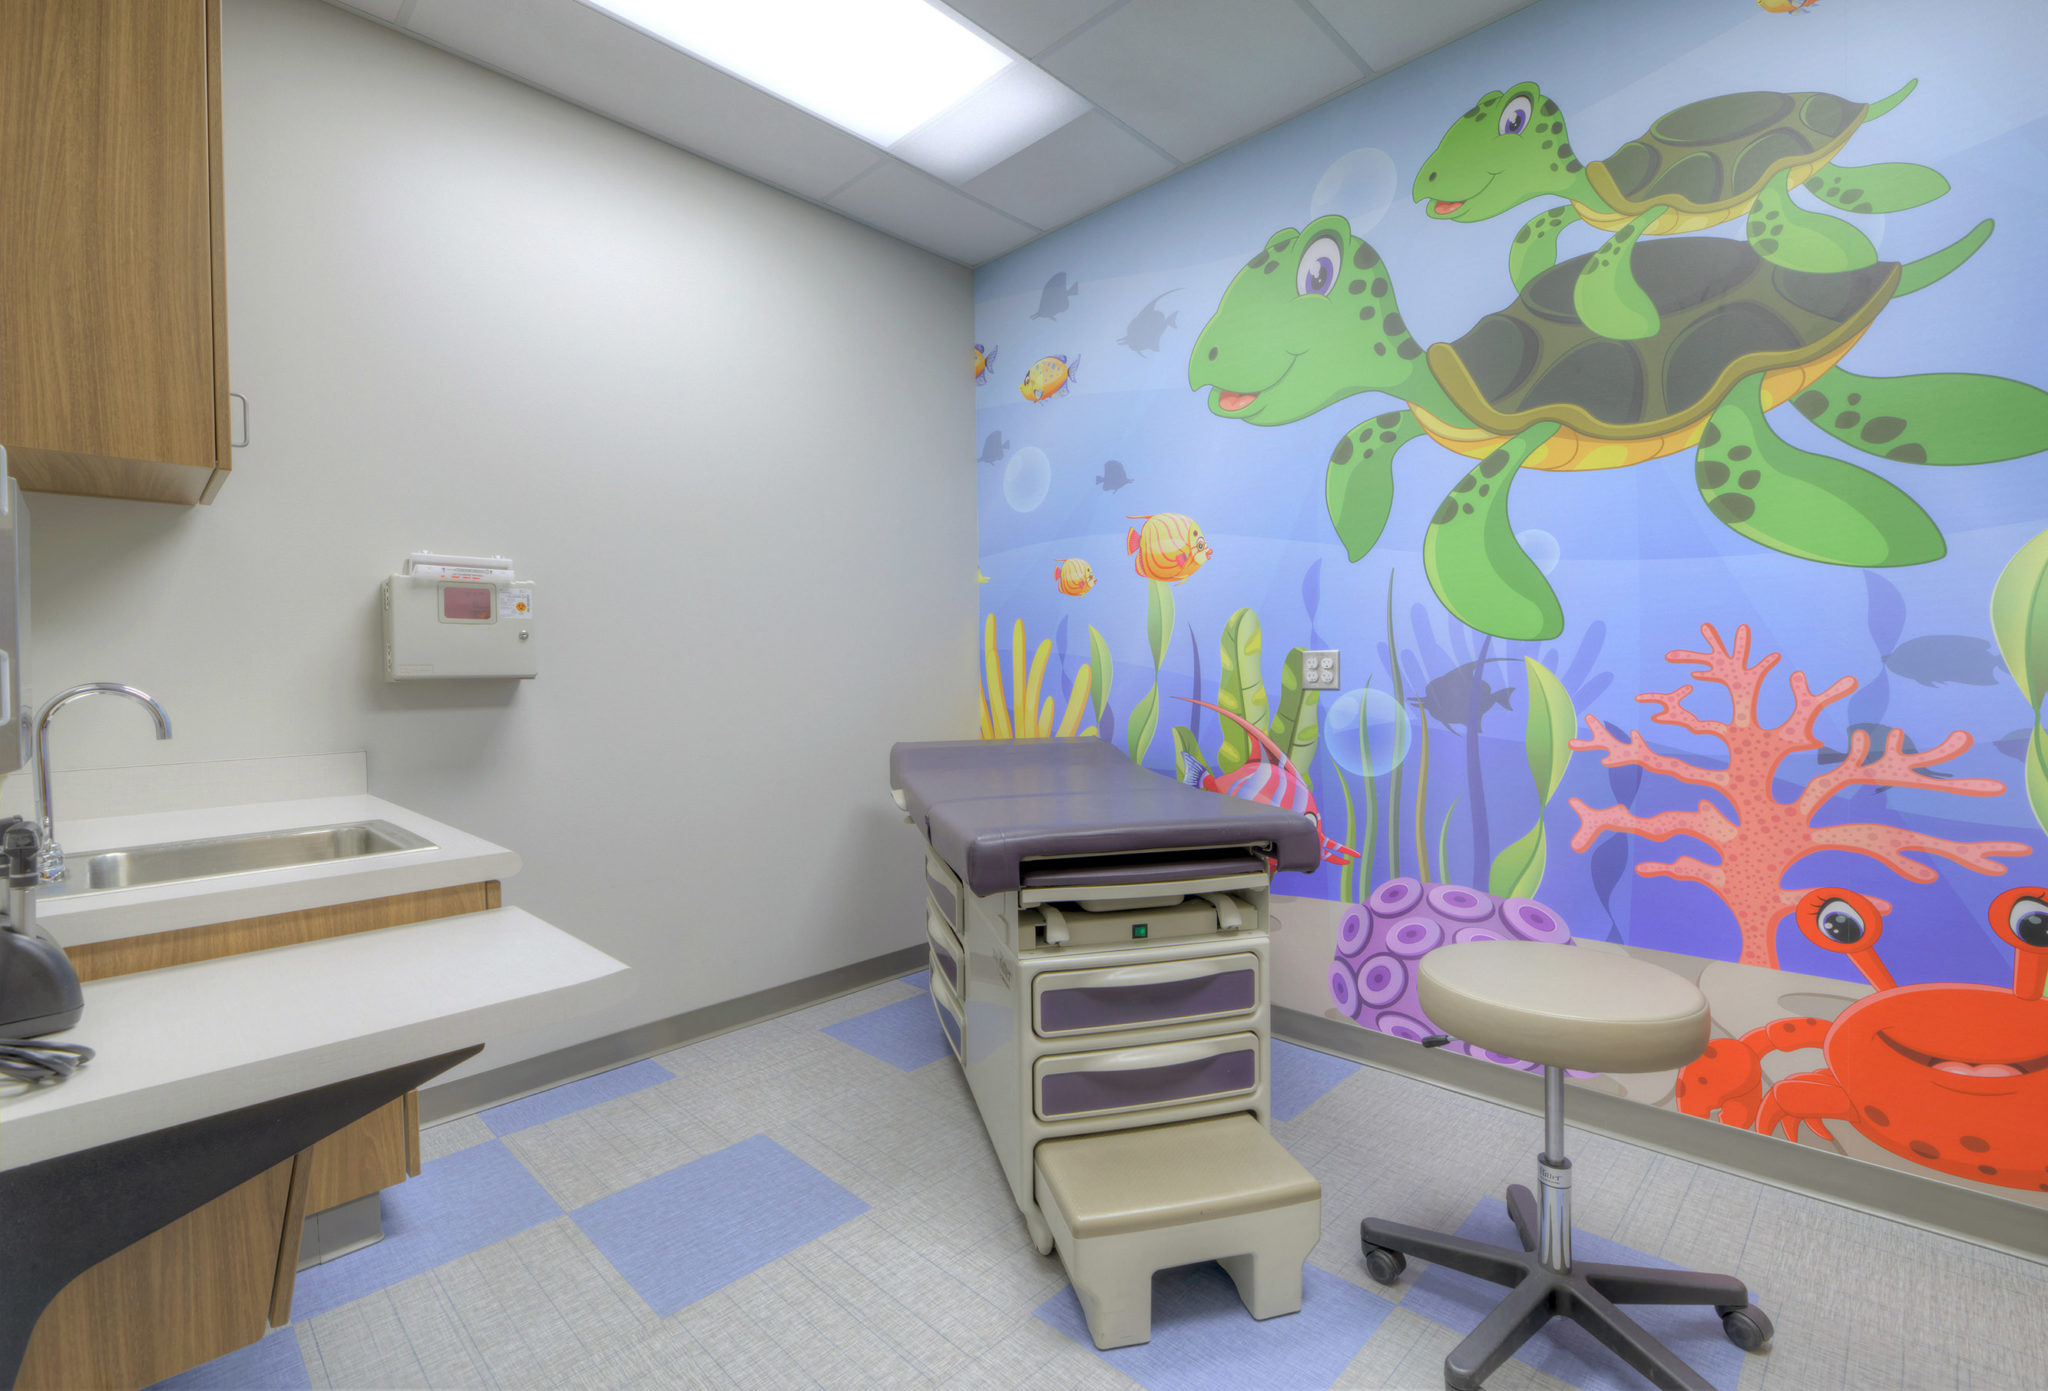 MHCC Patient Room with Wall Art